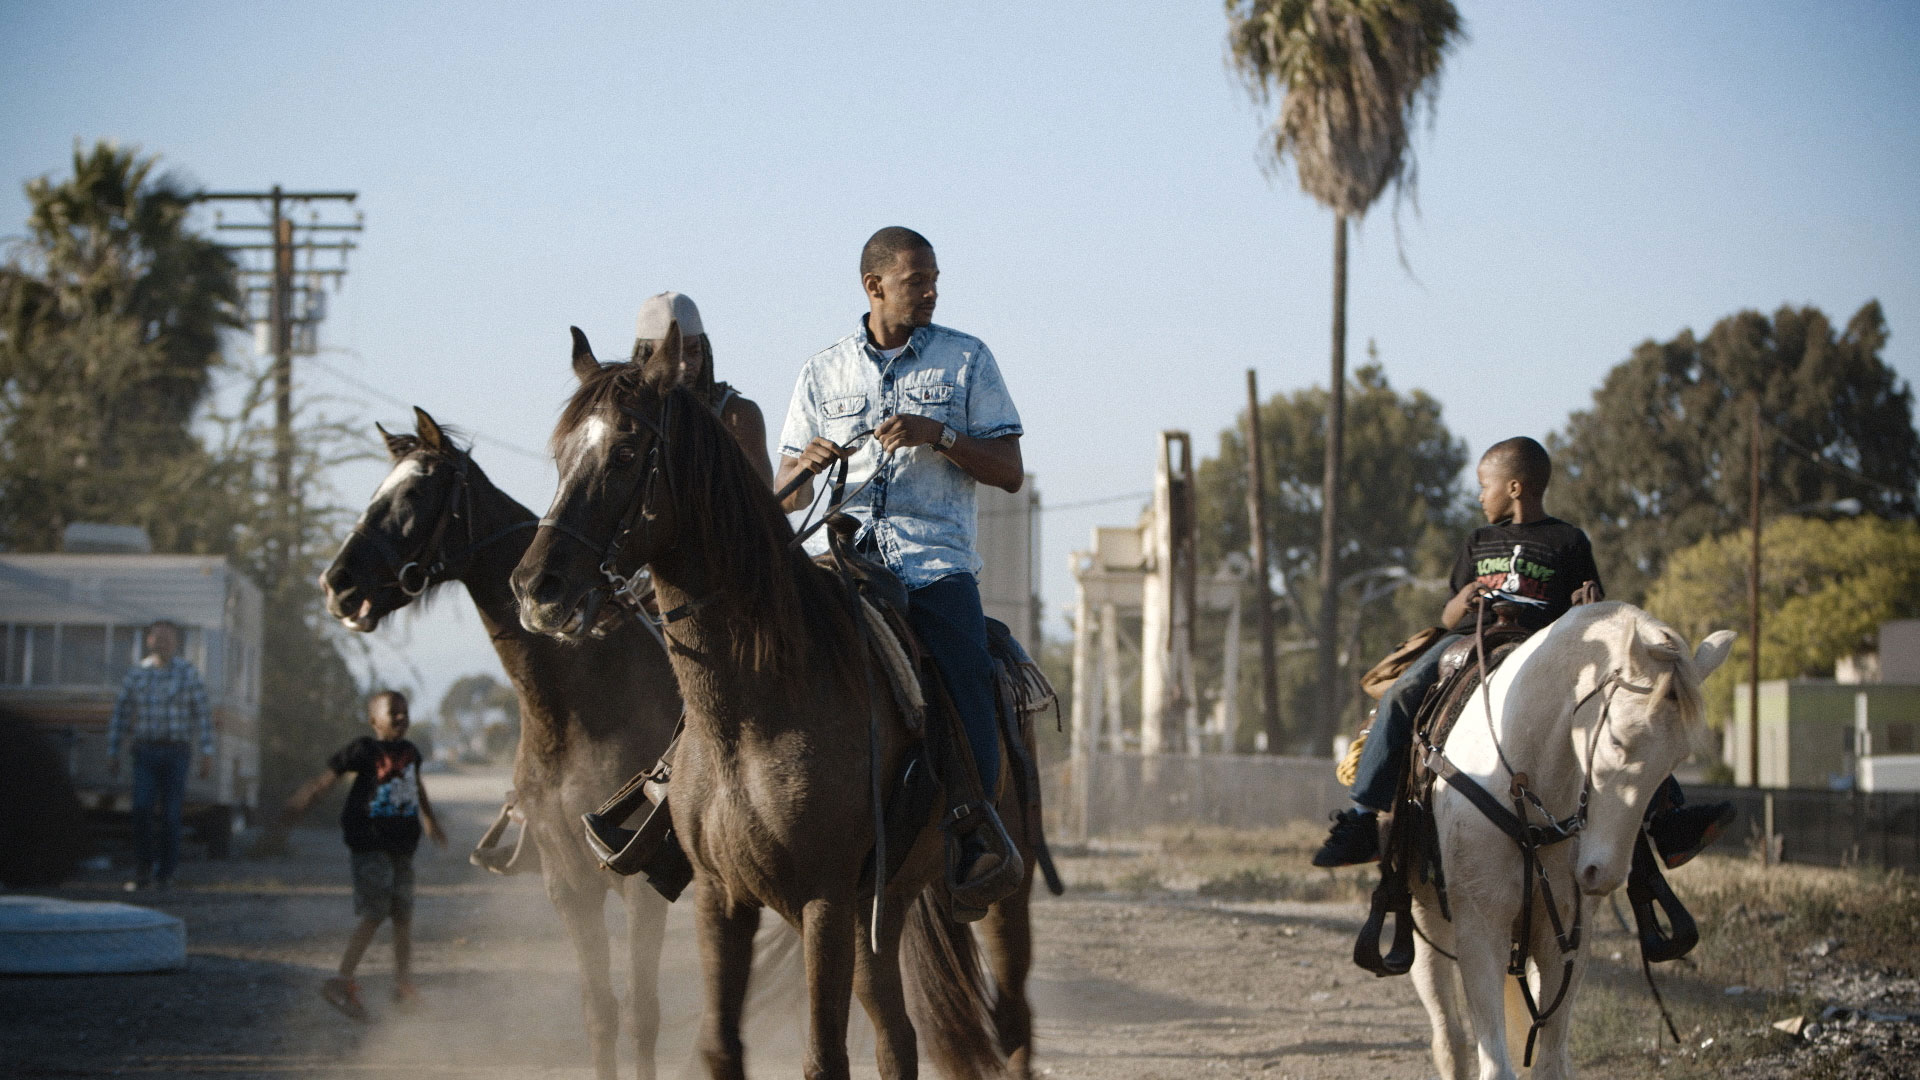 FIRE ON THE HILL:  THE COWBOYS OF SOUTH CENTRAL